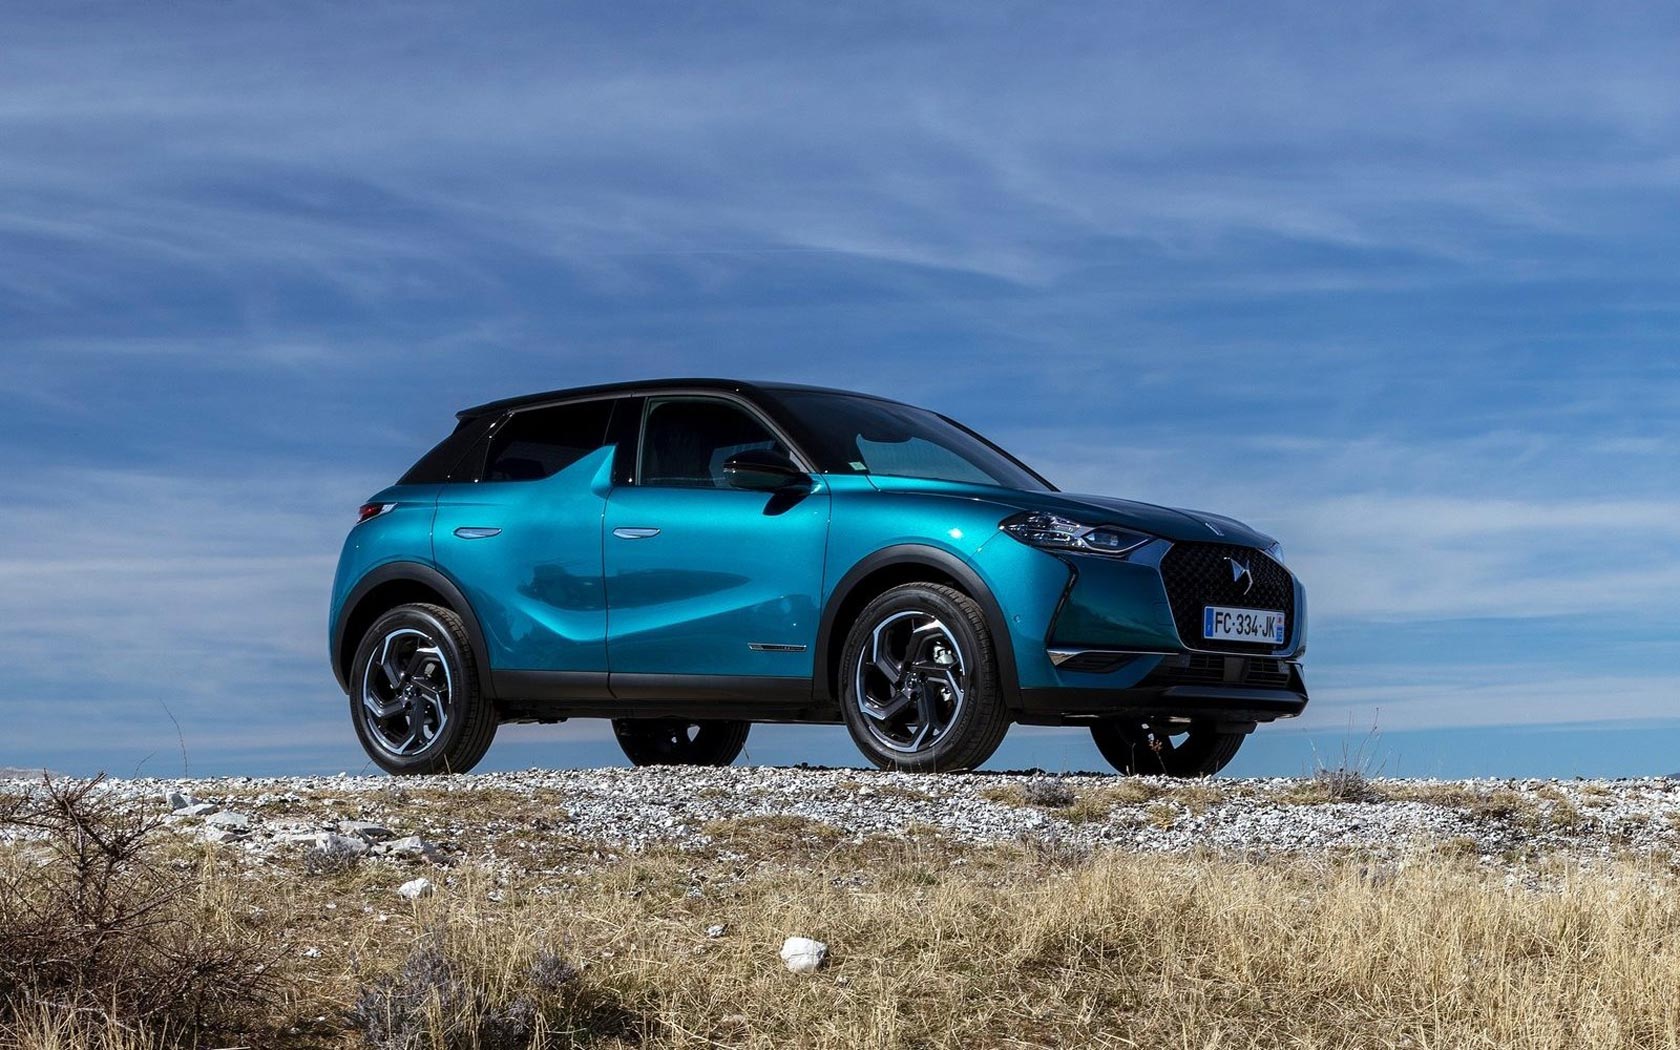  DS 3 Crossback 